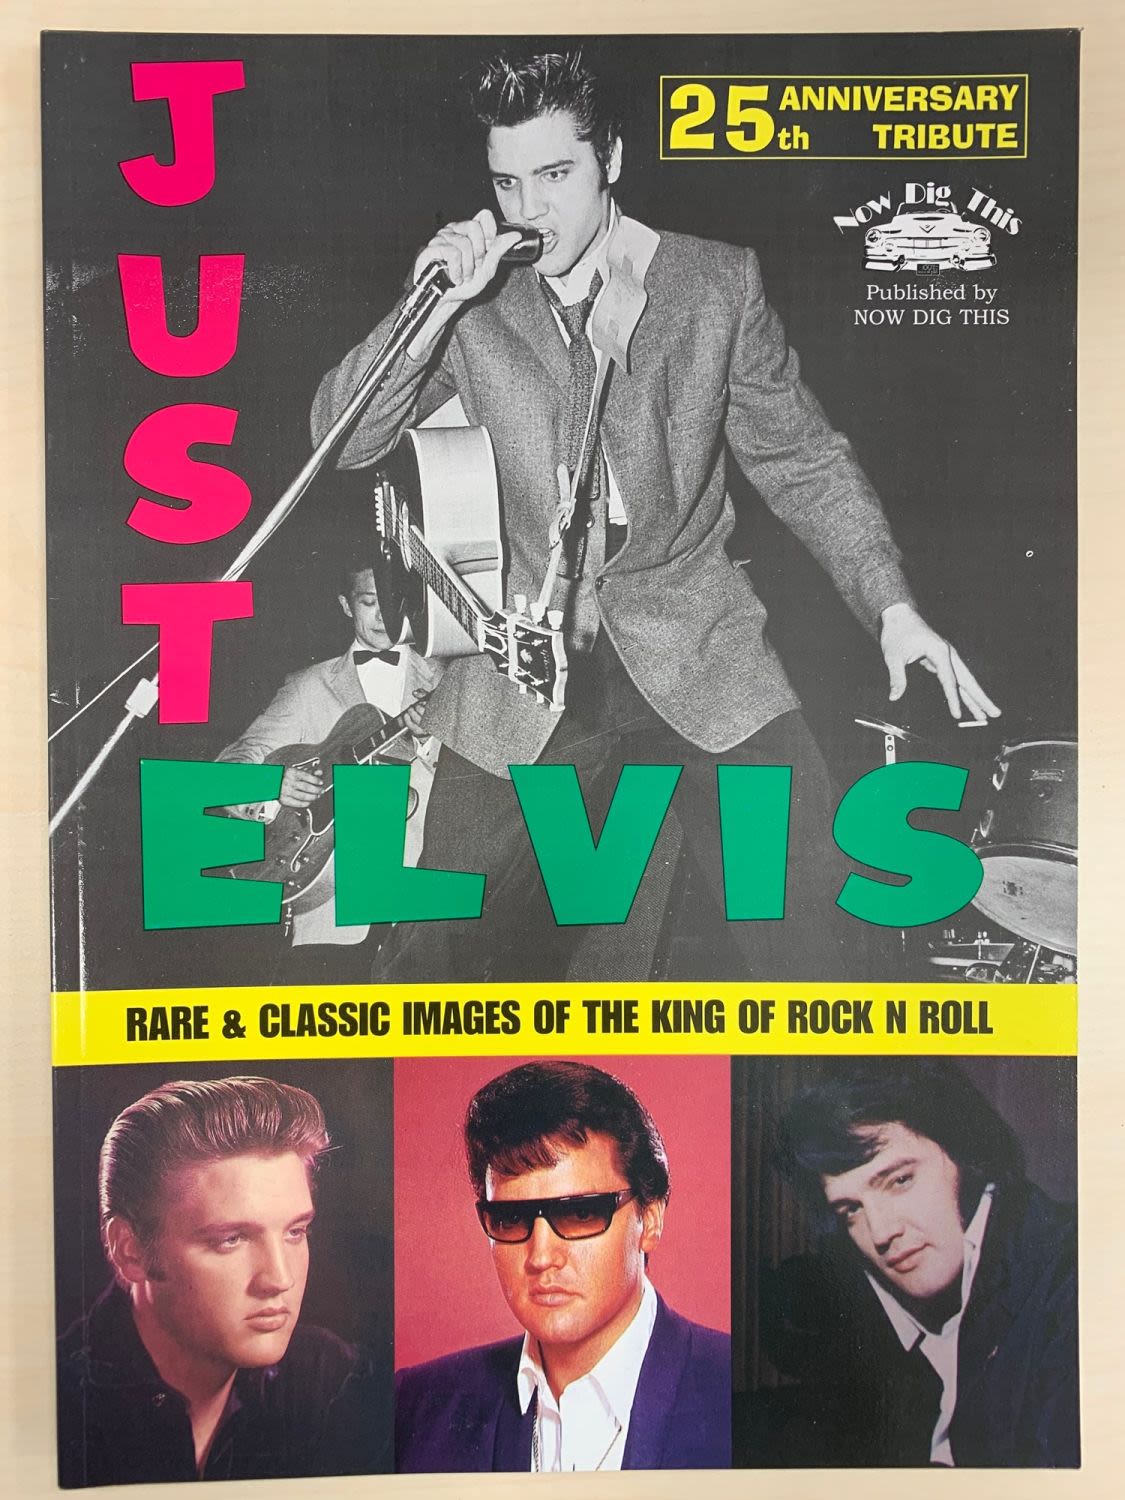 Elvis Presley books and other souvenir items. 30X30 cm (C1) - Image 4 of 5